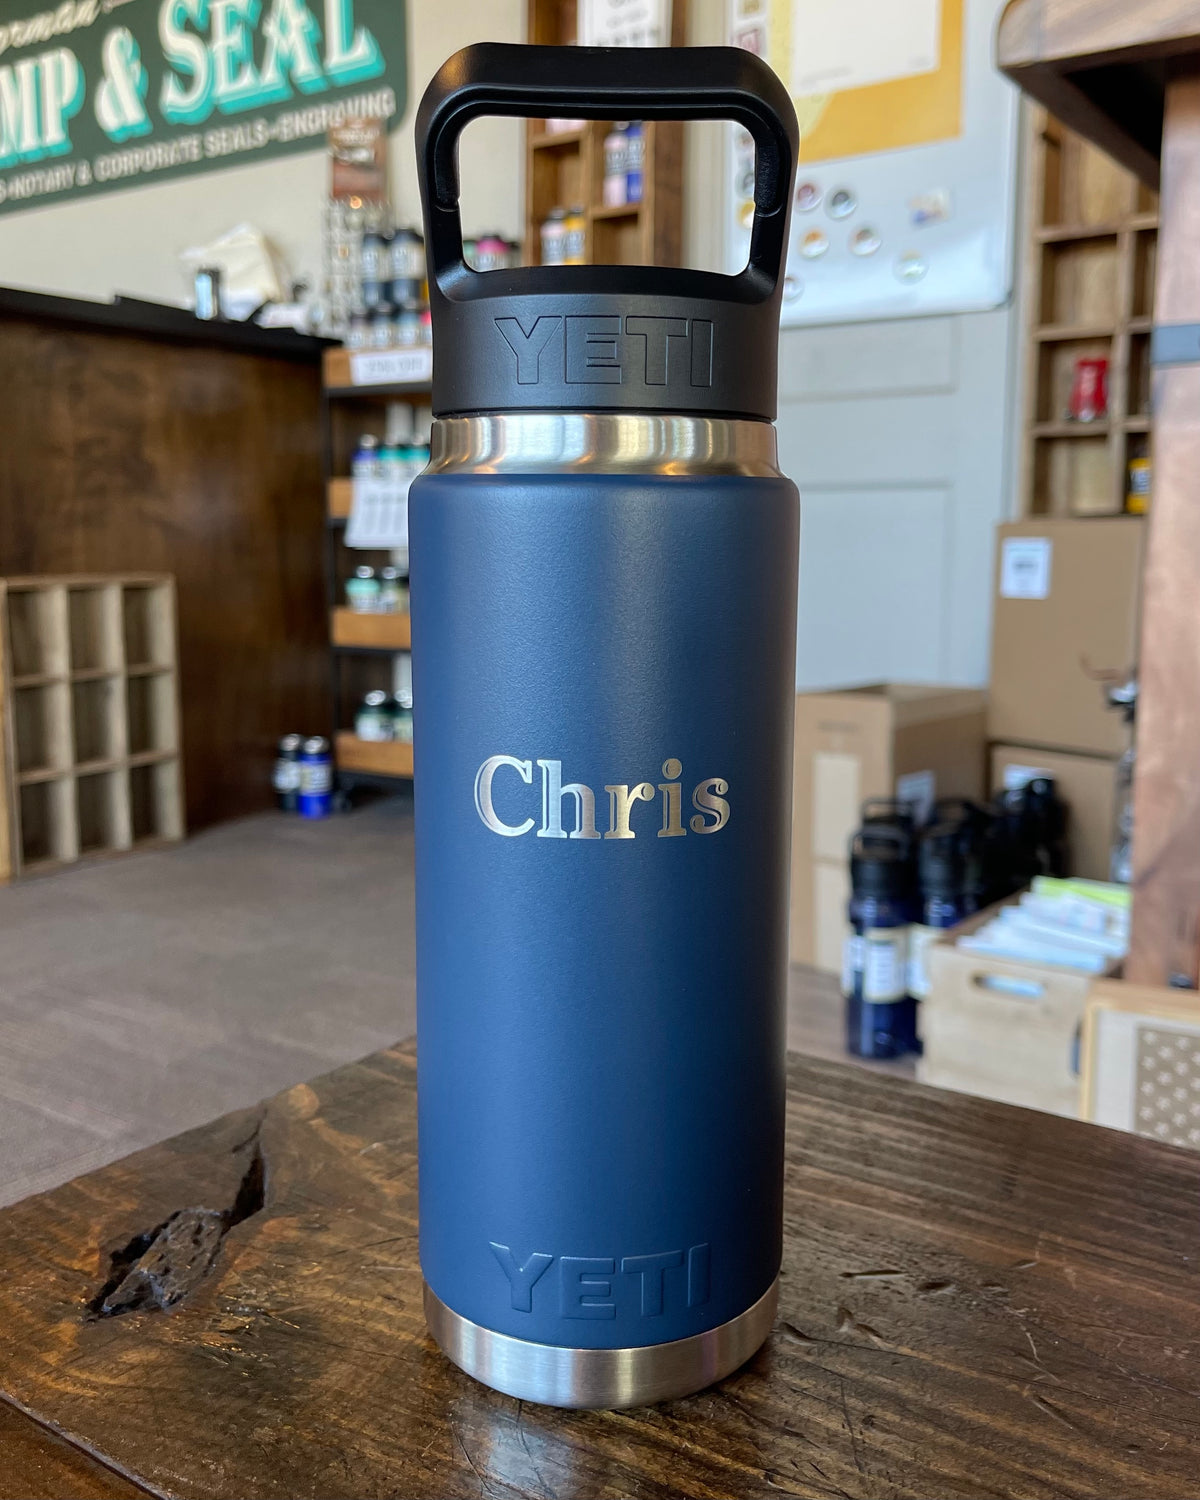 REAL YETI 26 Oz. Laser Engraved Navy Stainless Steel Yeti With